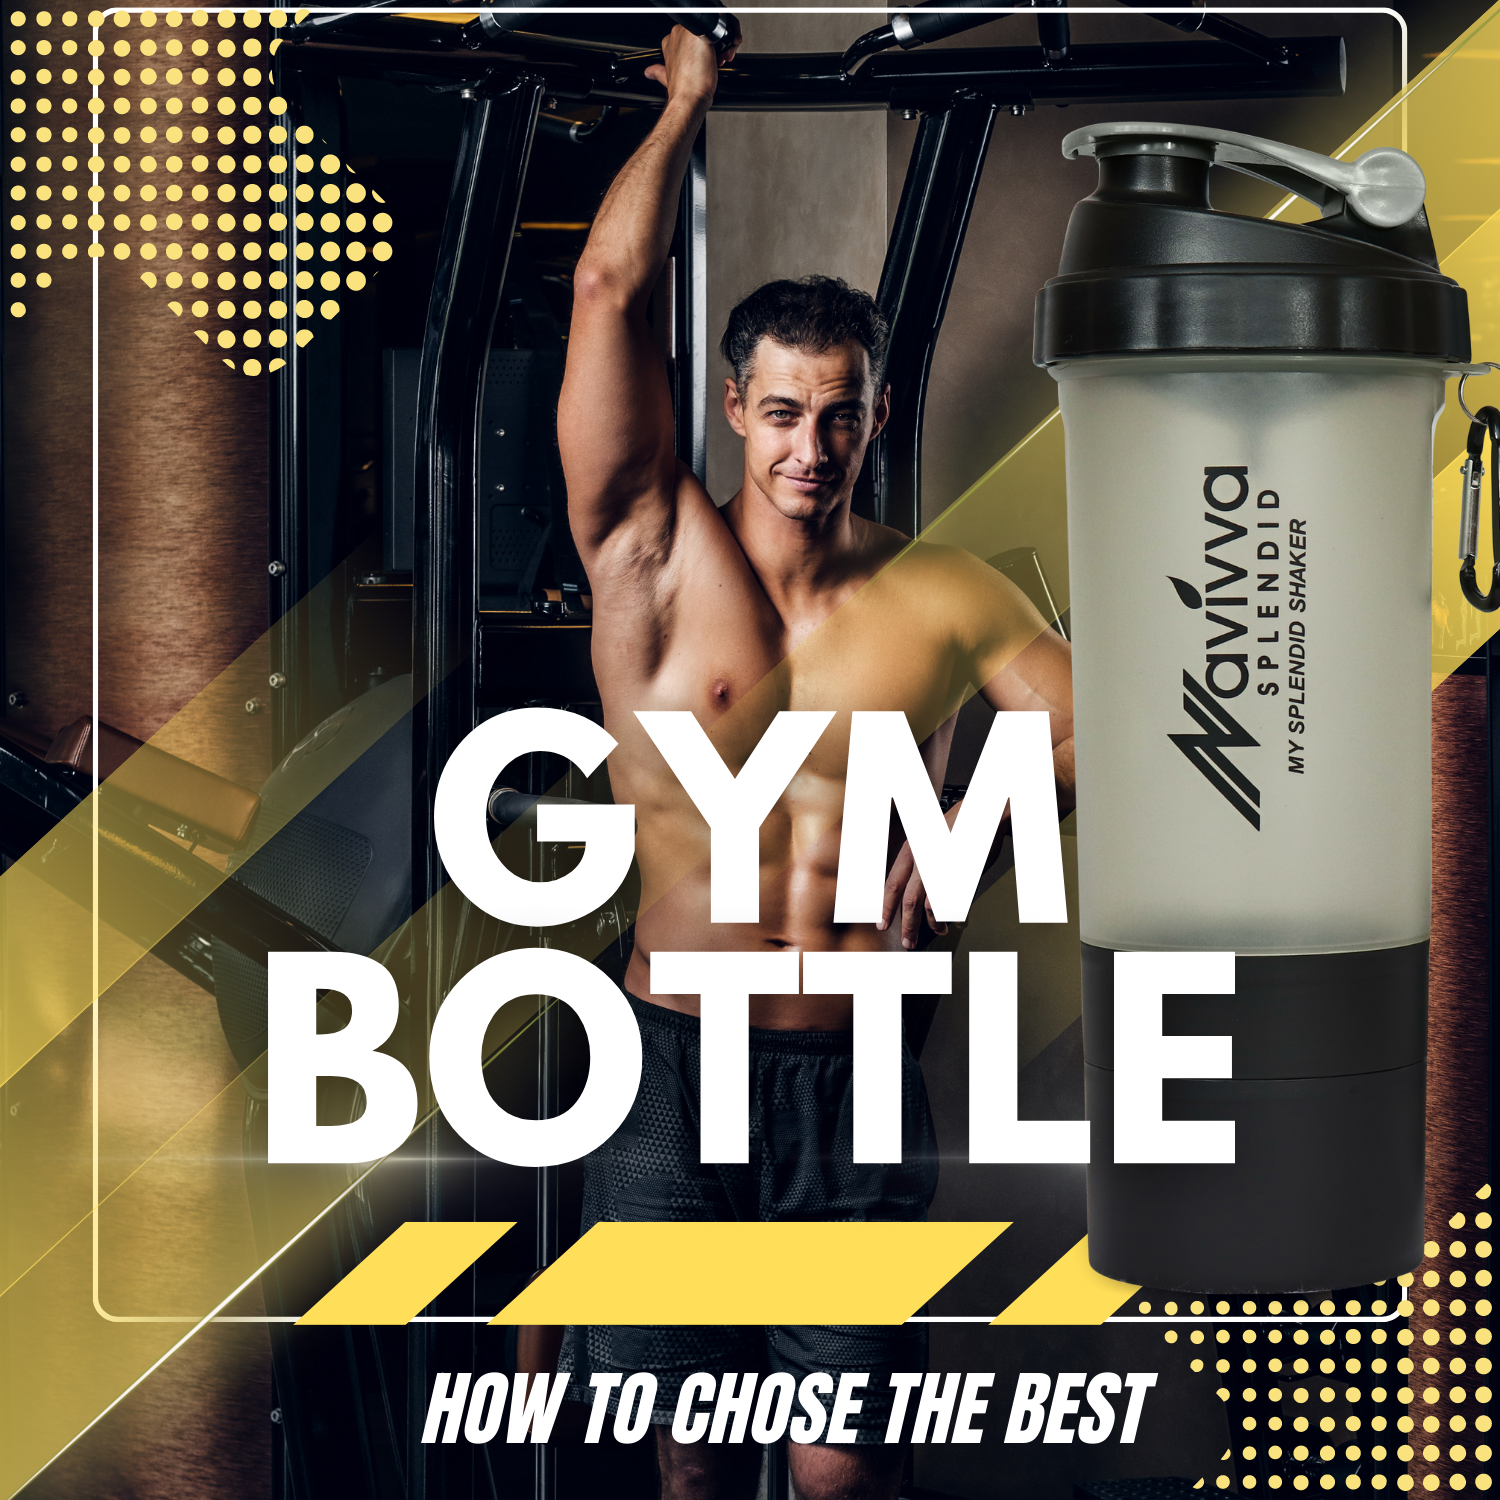 The Best Water Bottle for the Gym